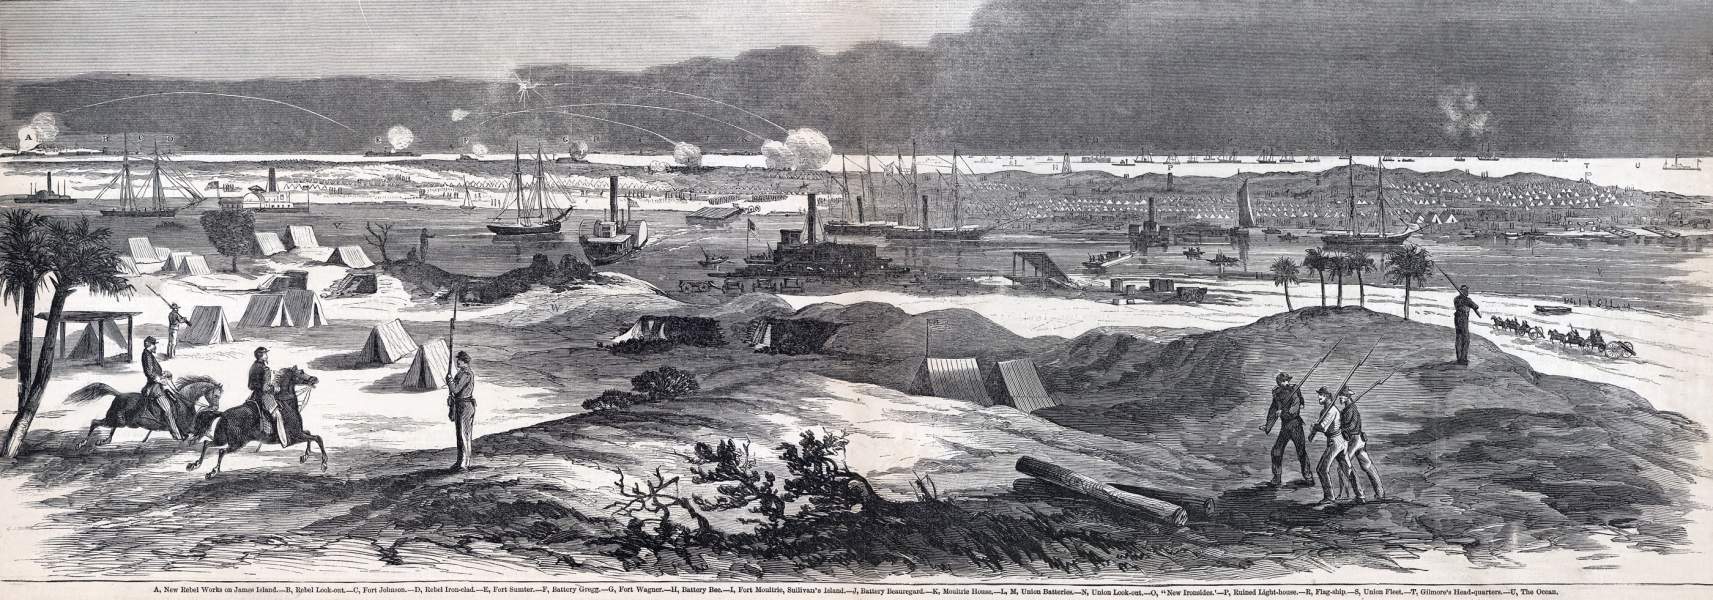 Morris Island, South Carolina, general view, August 1863, artist's impression, zoomable image